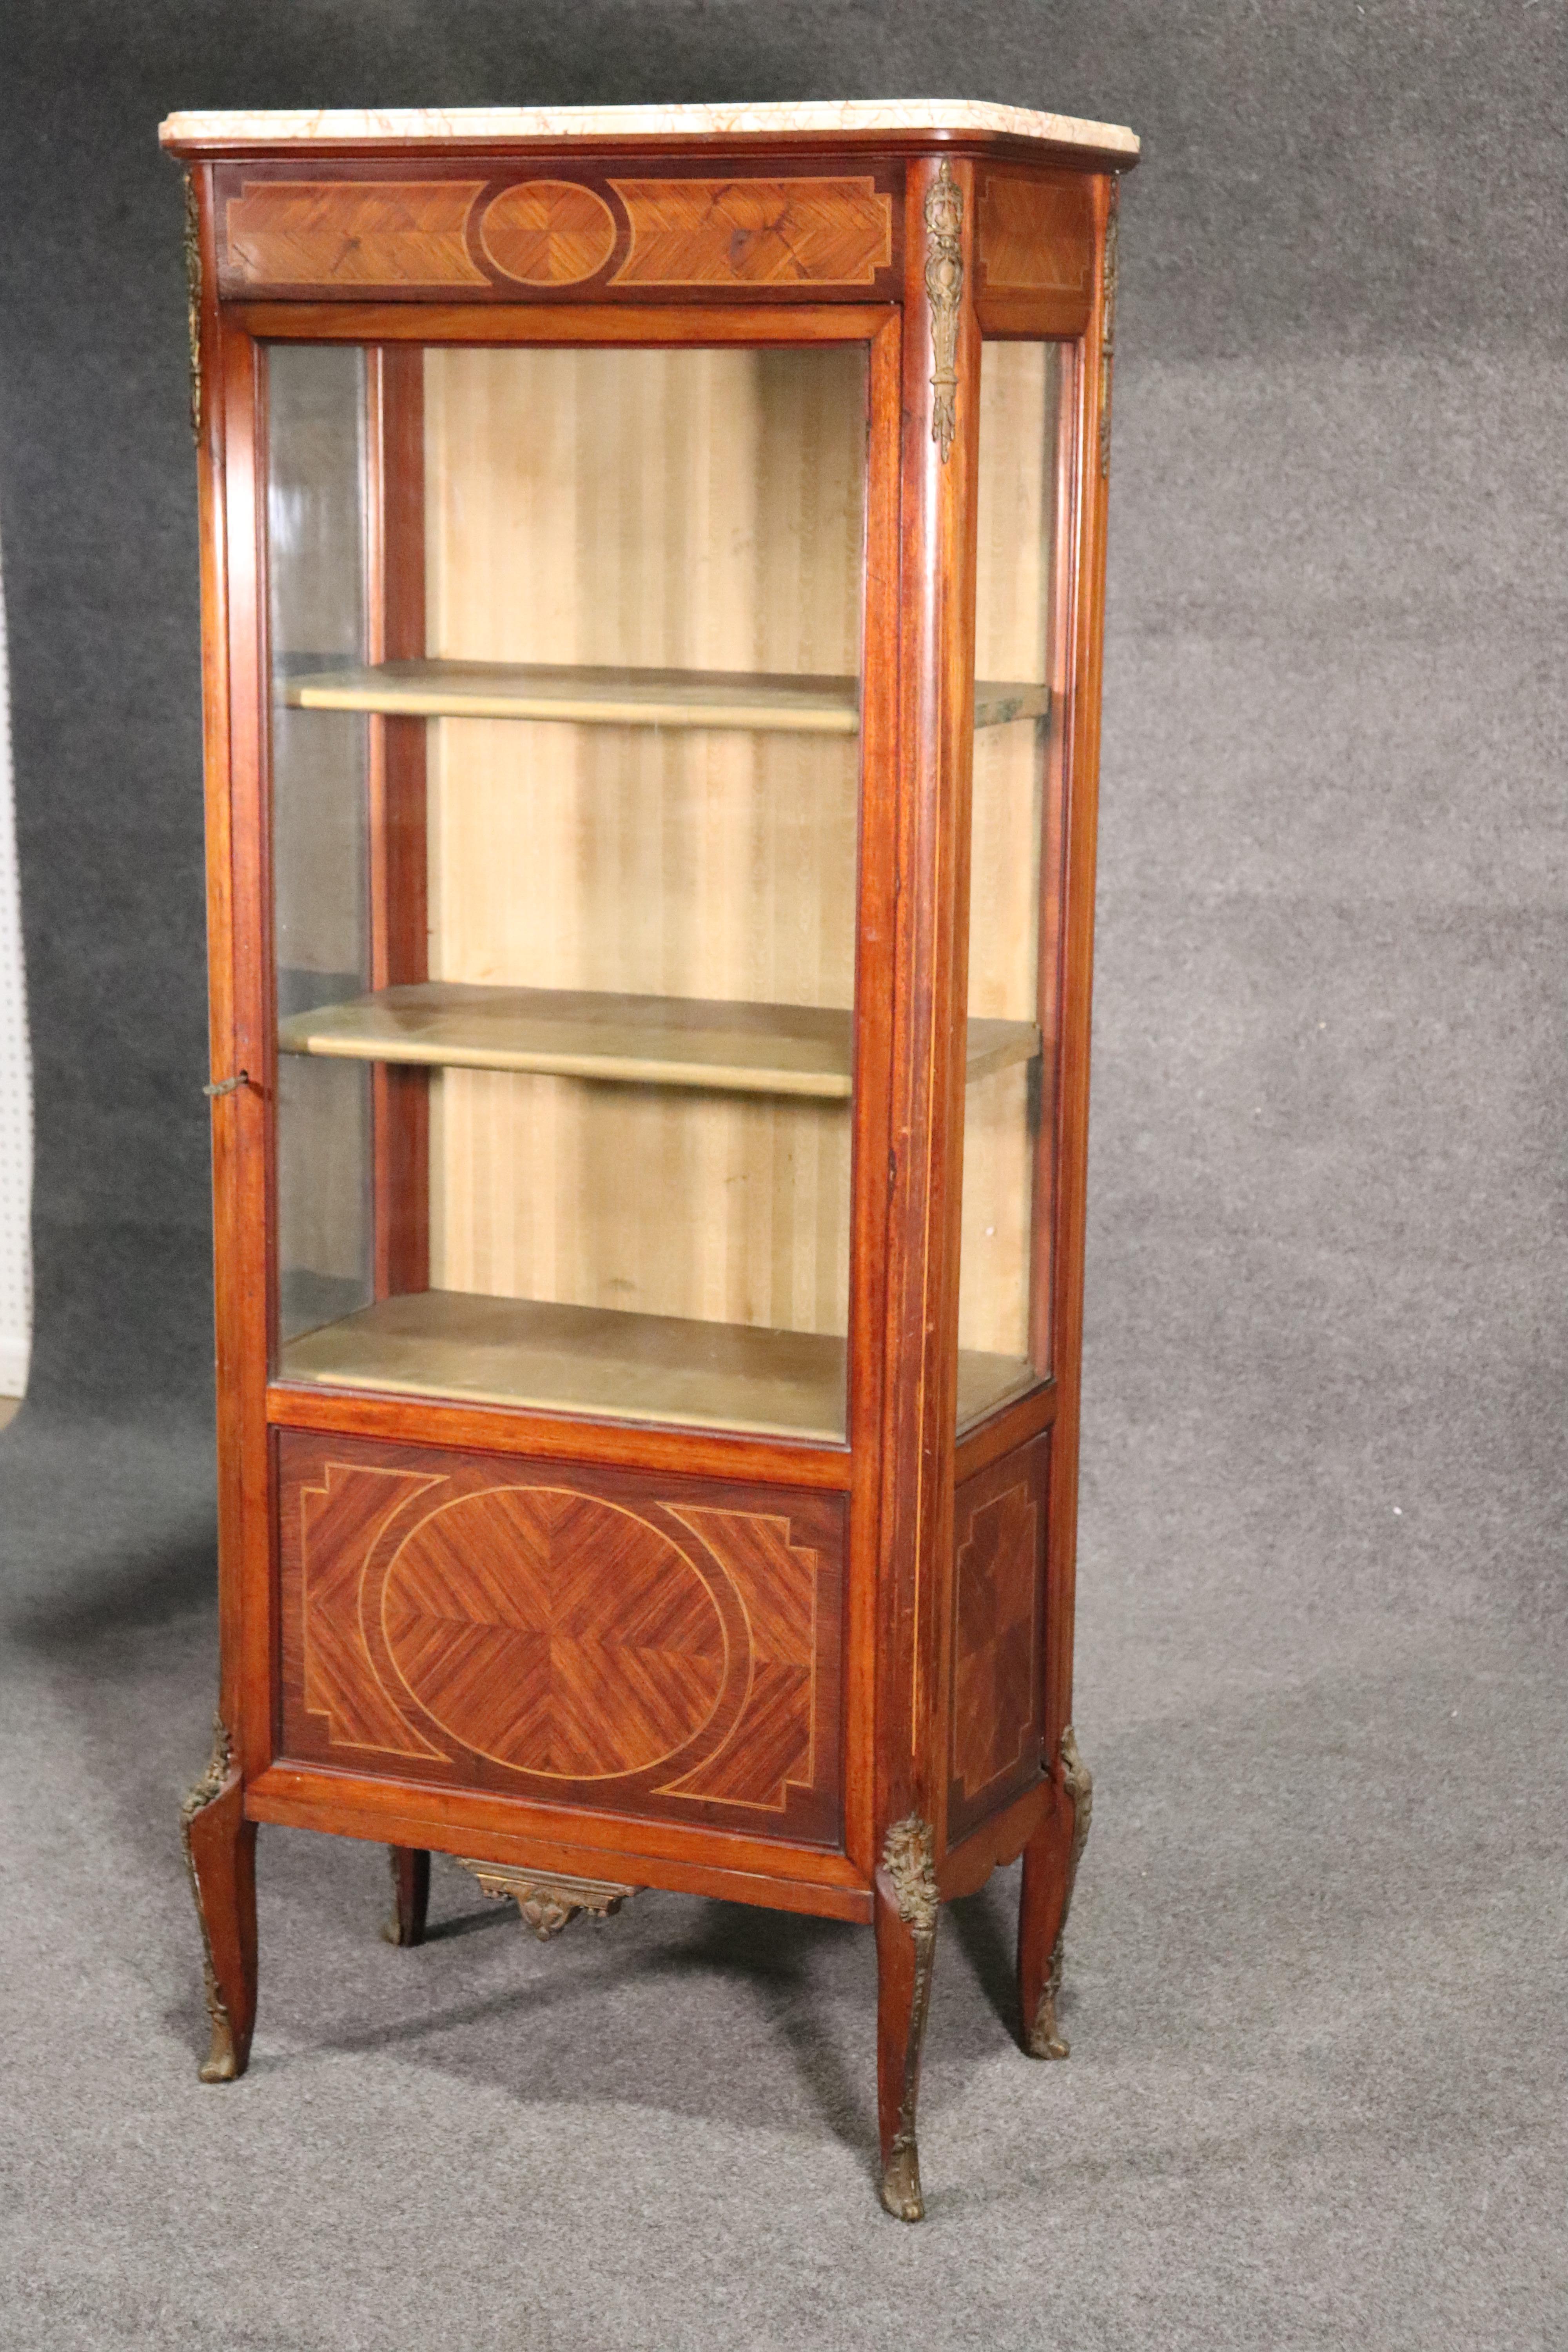 This is a nice original French 1890s Louis XV vitrine. The china cabinet is entirely original and has an original finish and patina. The marble is in good condition with no damage. The vitrine measures 64 tall x 27 wide x 14 inches deep.